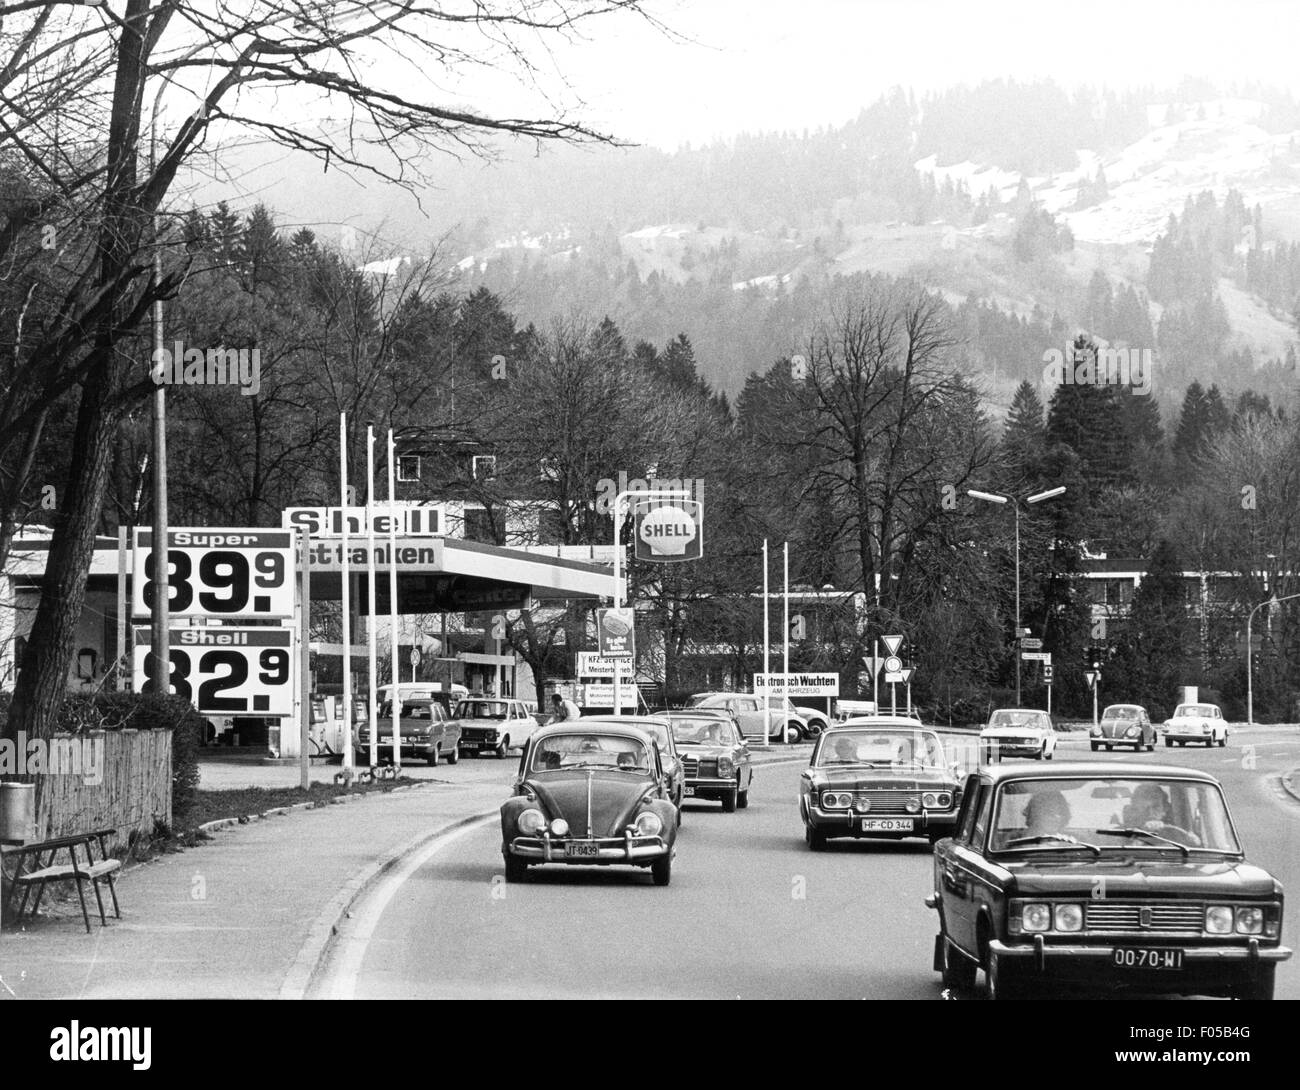 transport / transportation, car, petrol station, 'Shell' petrol station, Garmisch-Partenkirchen, 26.3.1974, Additional-Rights-Clearences-Not Available Stock Photo